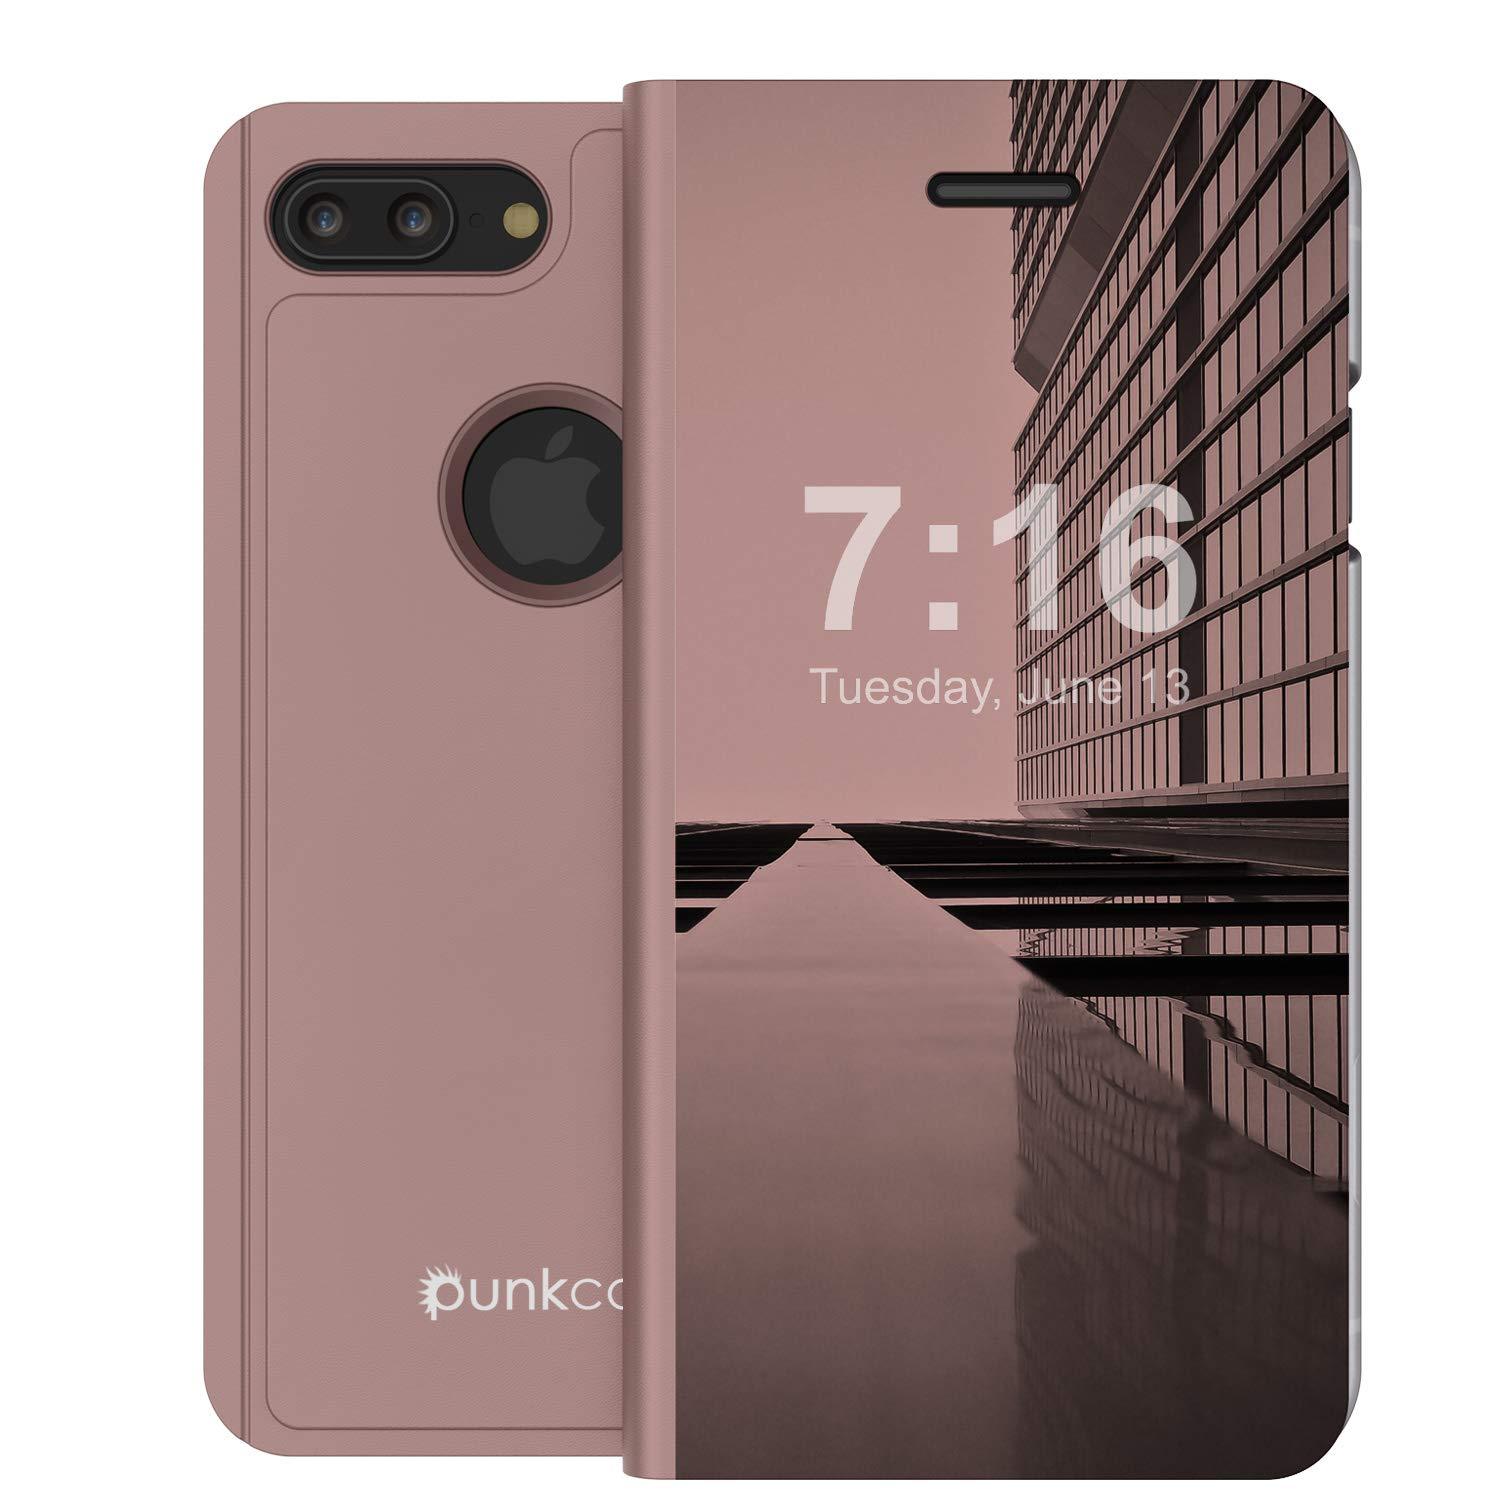 Punkcase Note 9 Reflector Case Protective Flip Cover [Rose]